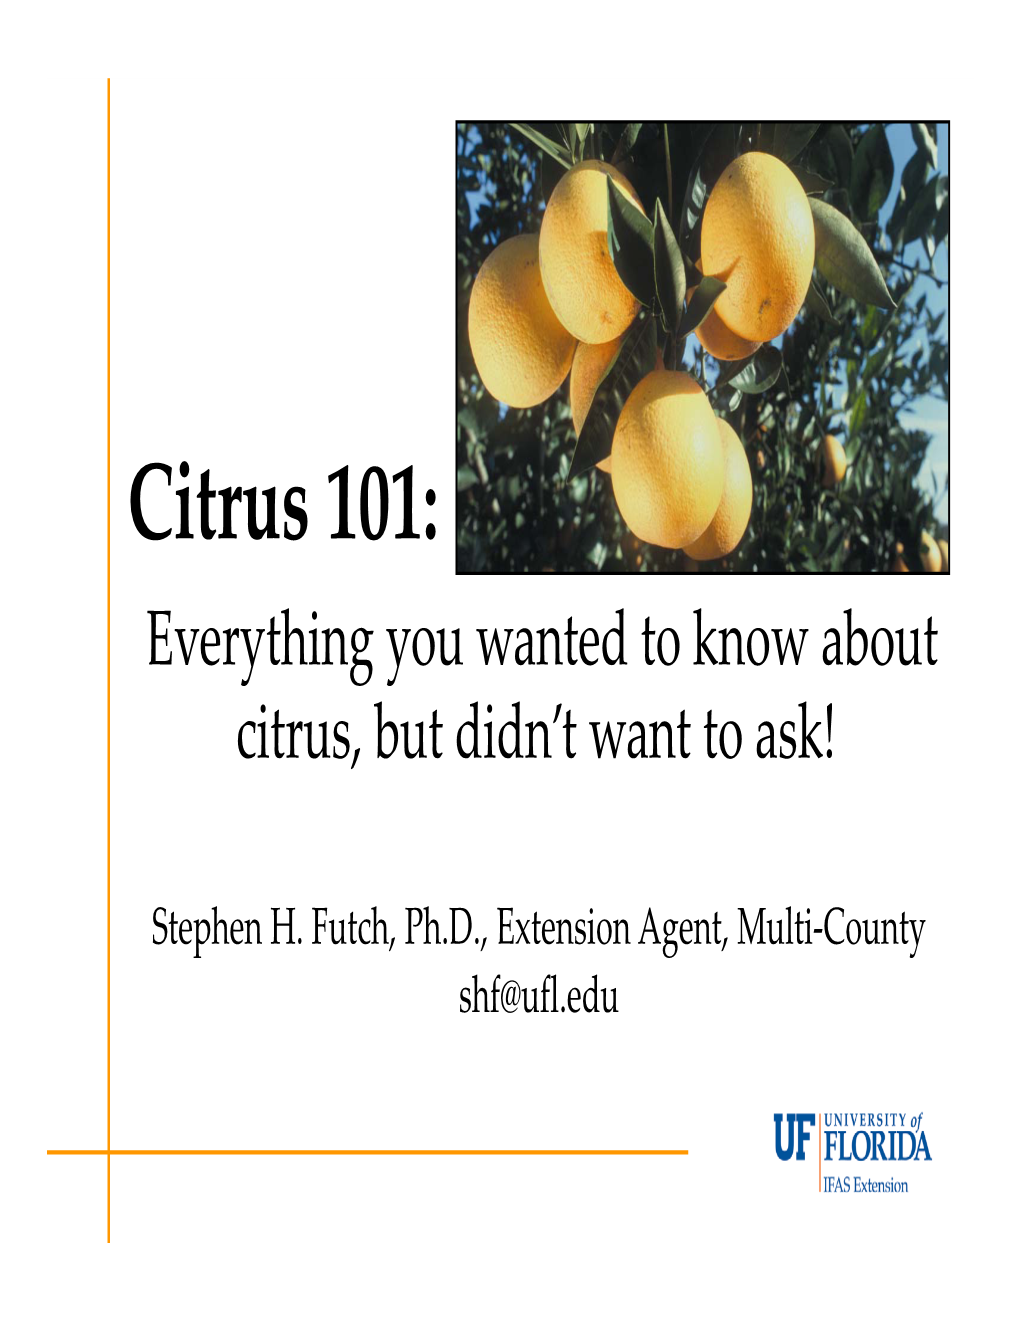 Citrus 101: Everything You Wanted to Know About Citrus, but Didn’T Want to Ask!